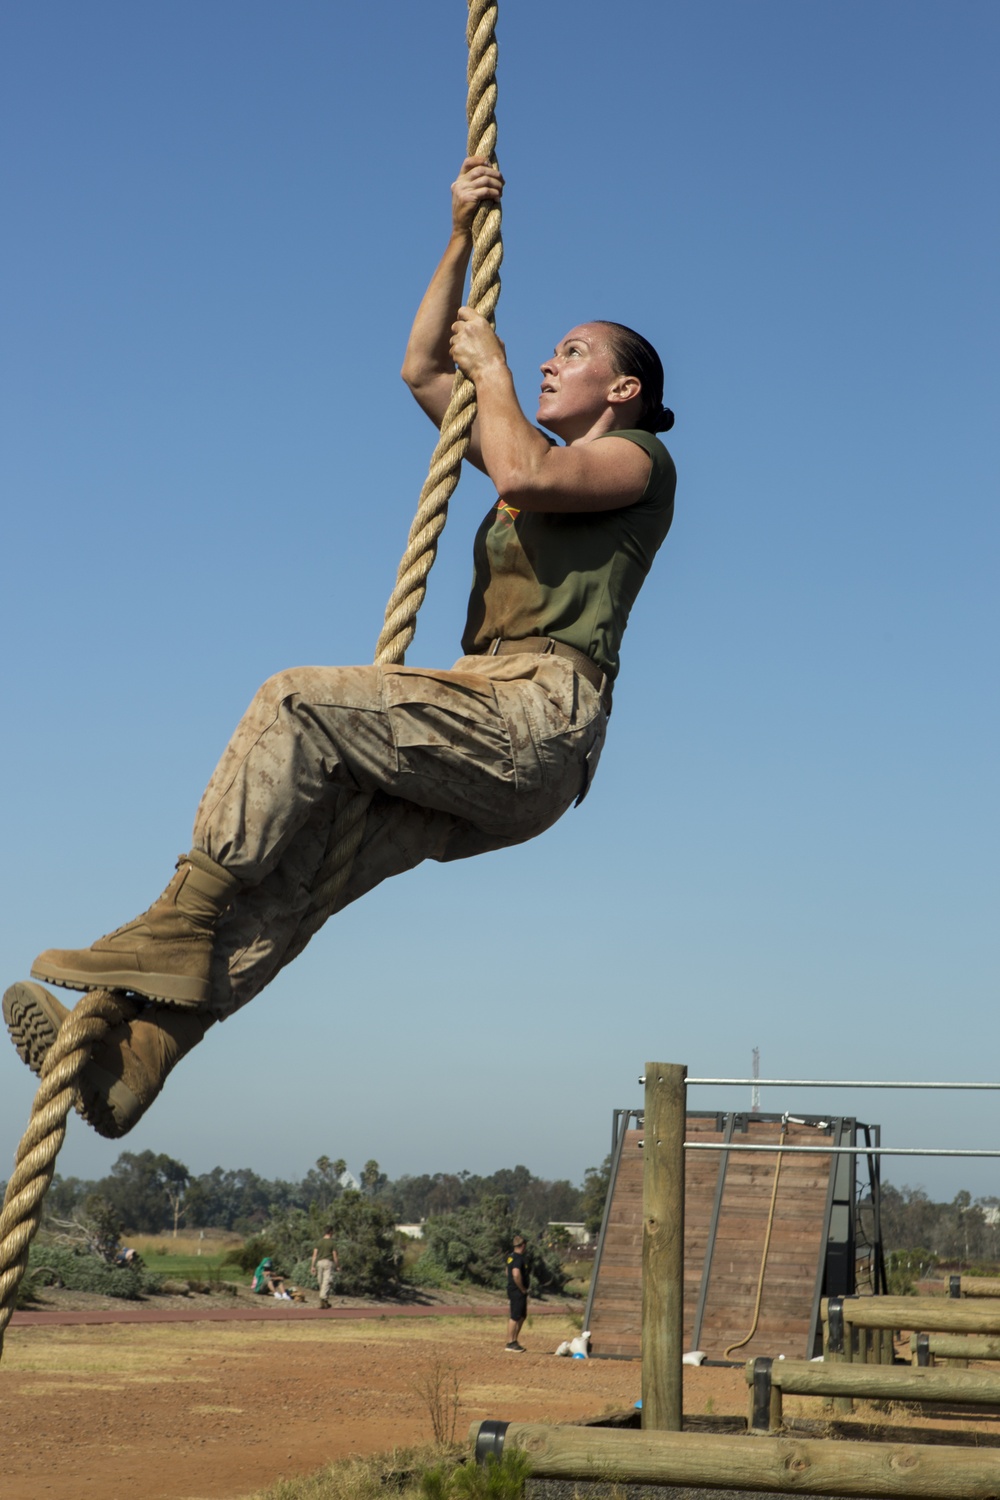 Pushing the limits: Marines compete in HITT Tactical Athlete Championship